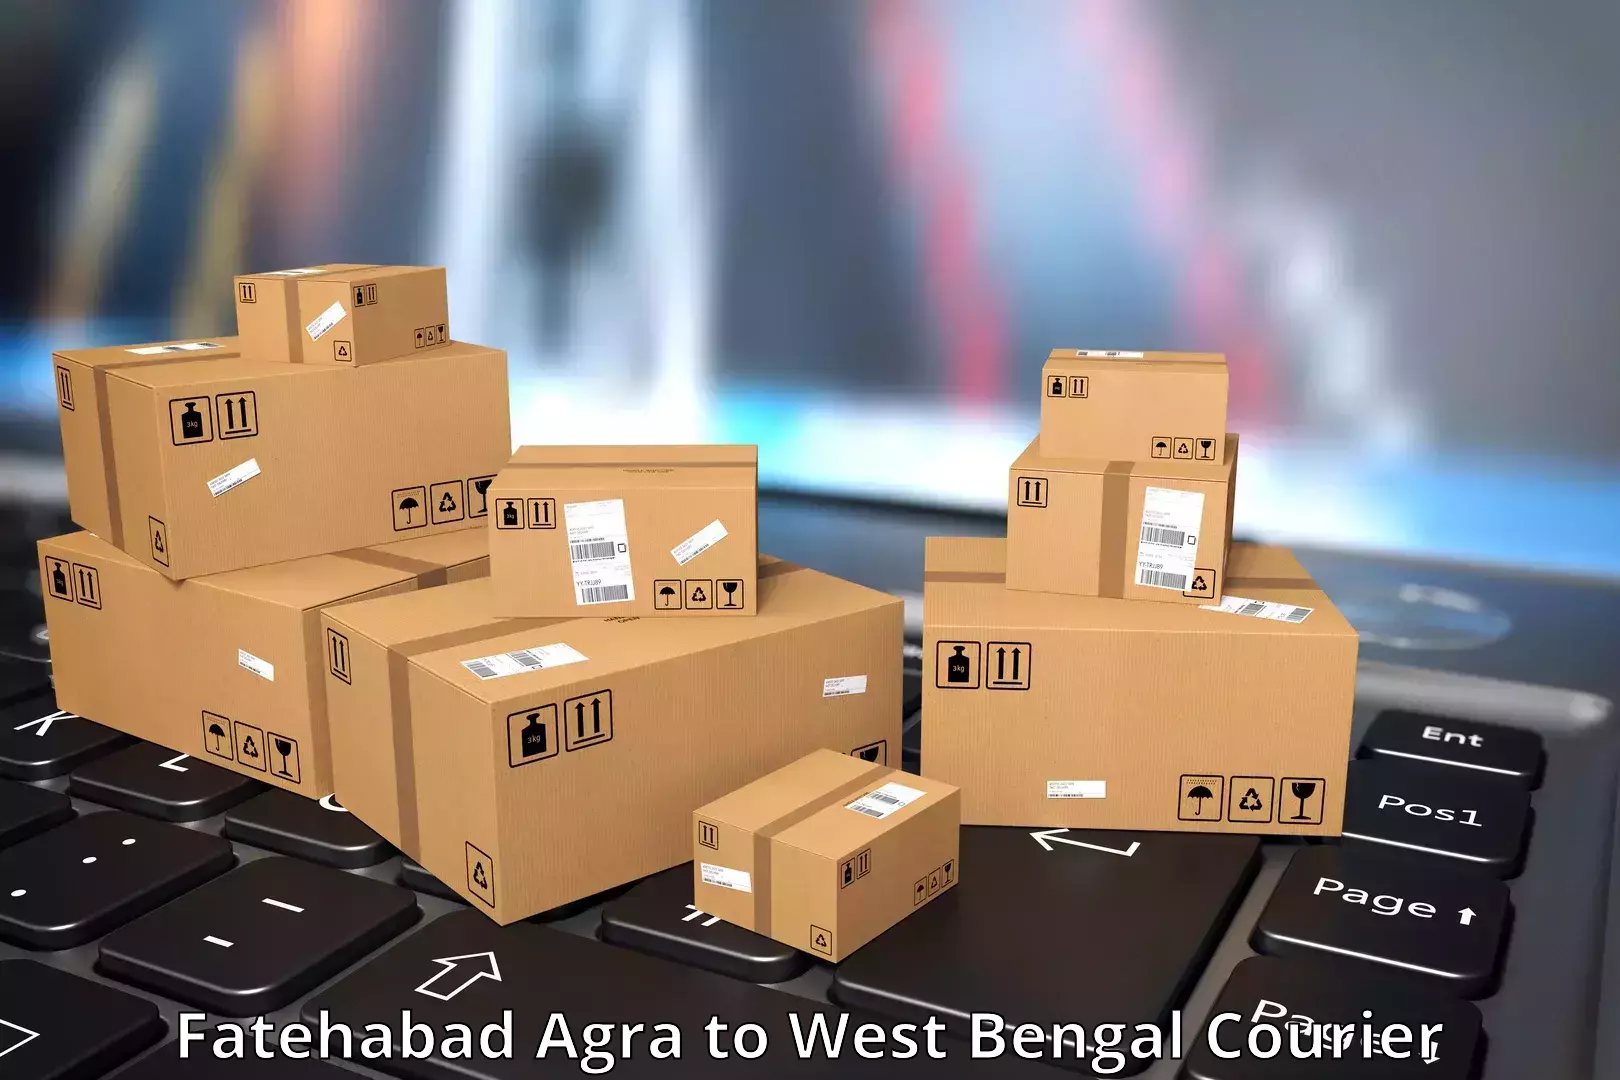 Global freight services Fatehabad Agra to West Bengal